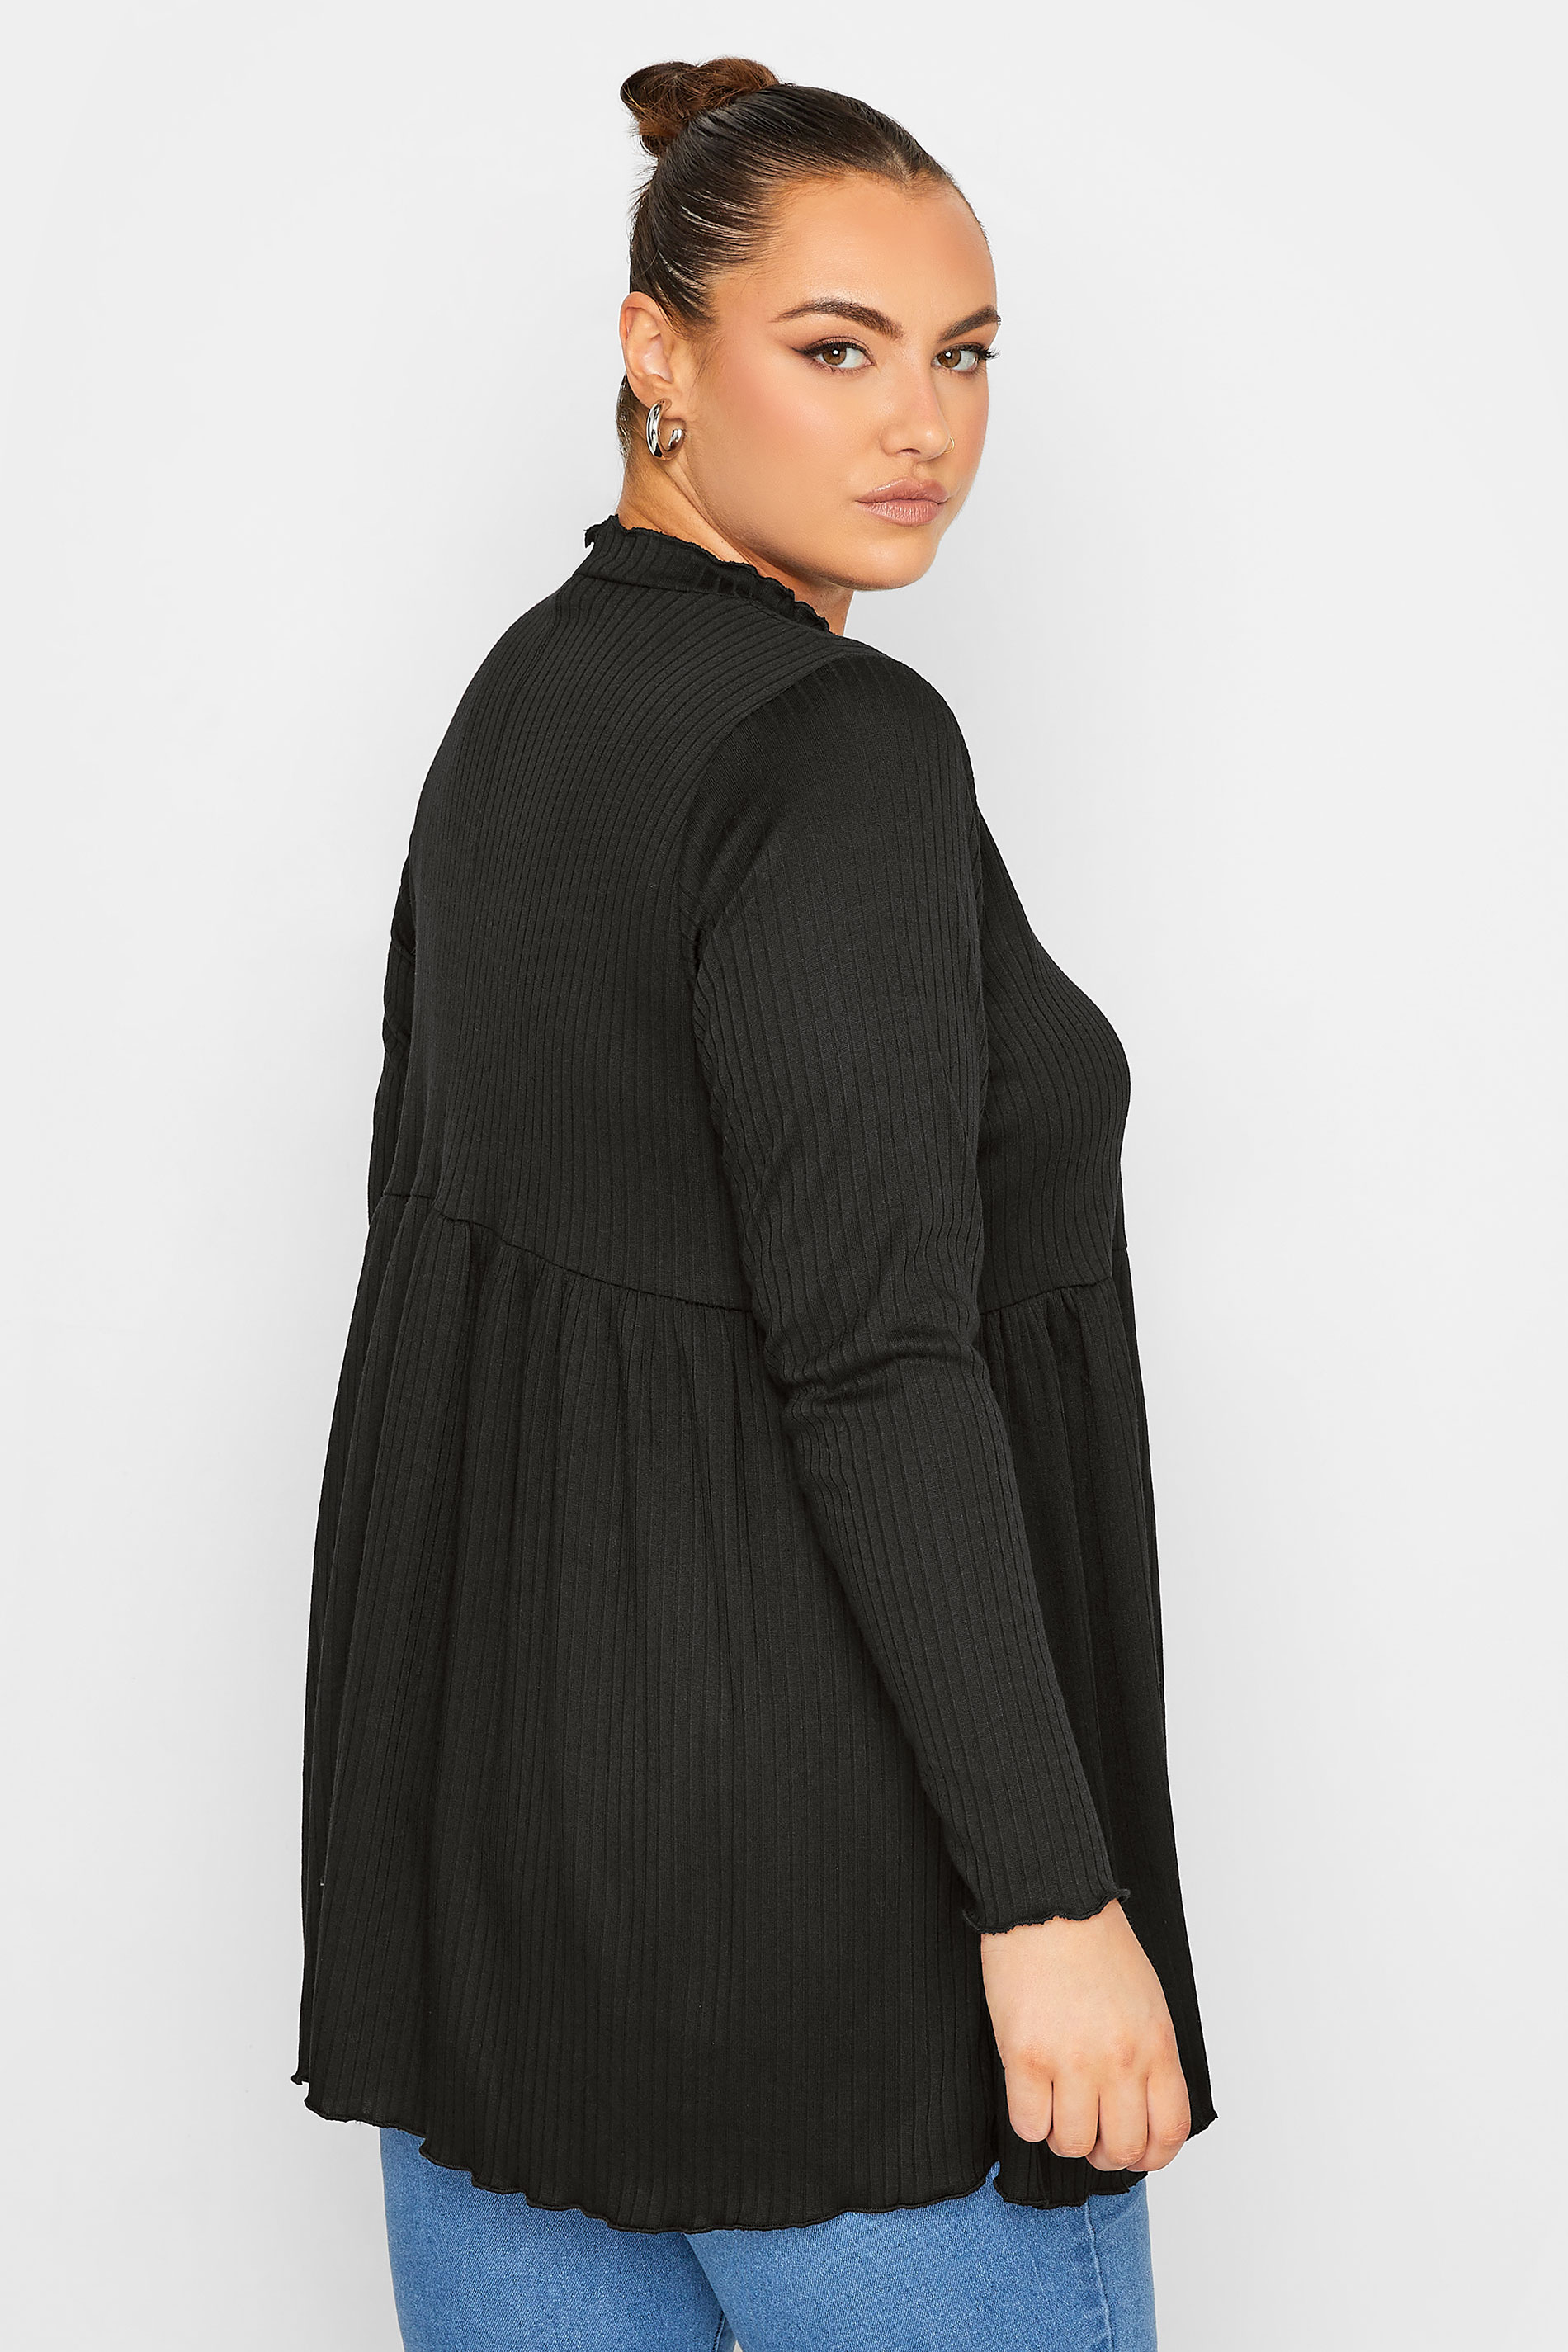 LIMITED COLLECTION Plus Size Black Peplum Lettuce Hem Top | Yours Clothing  3